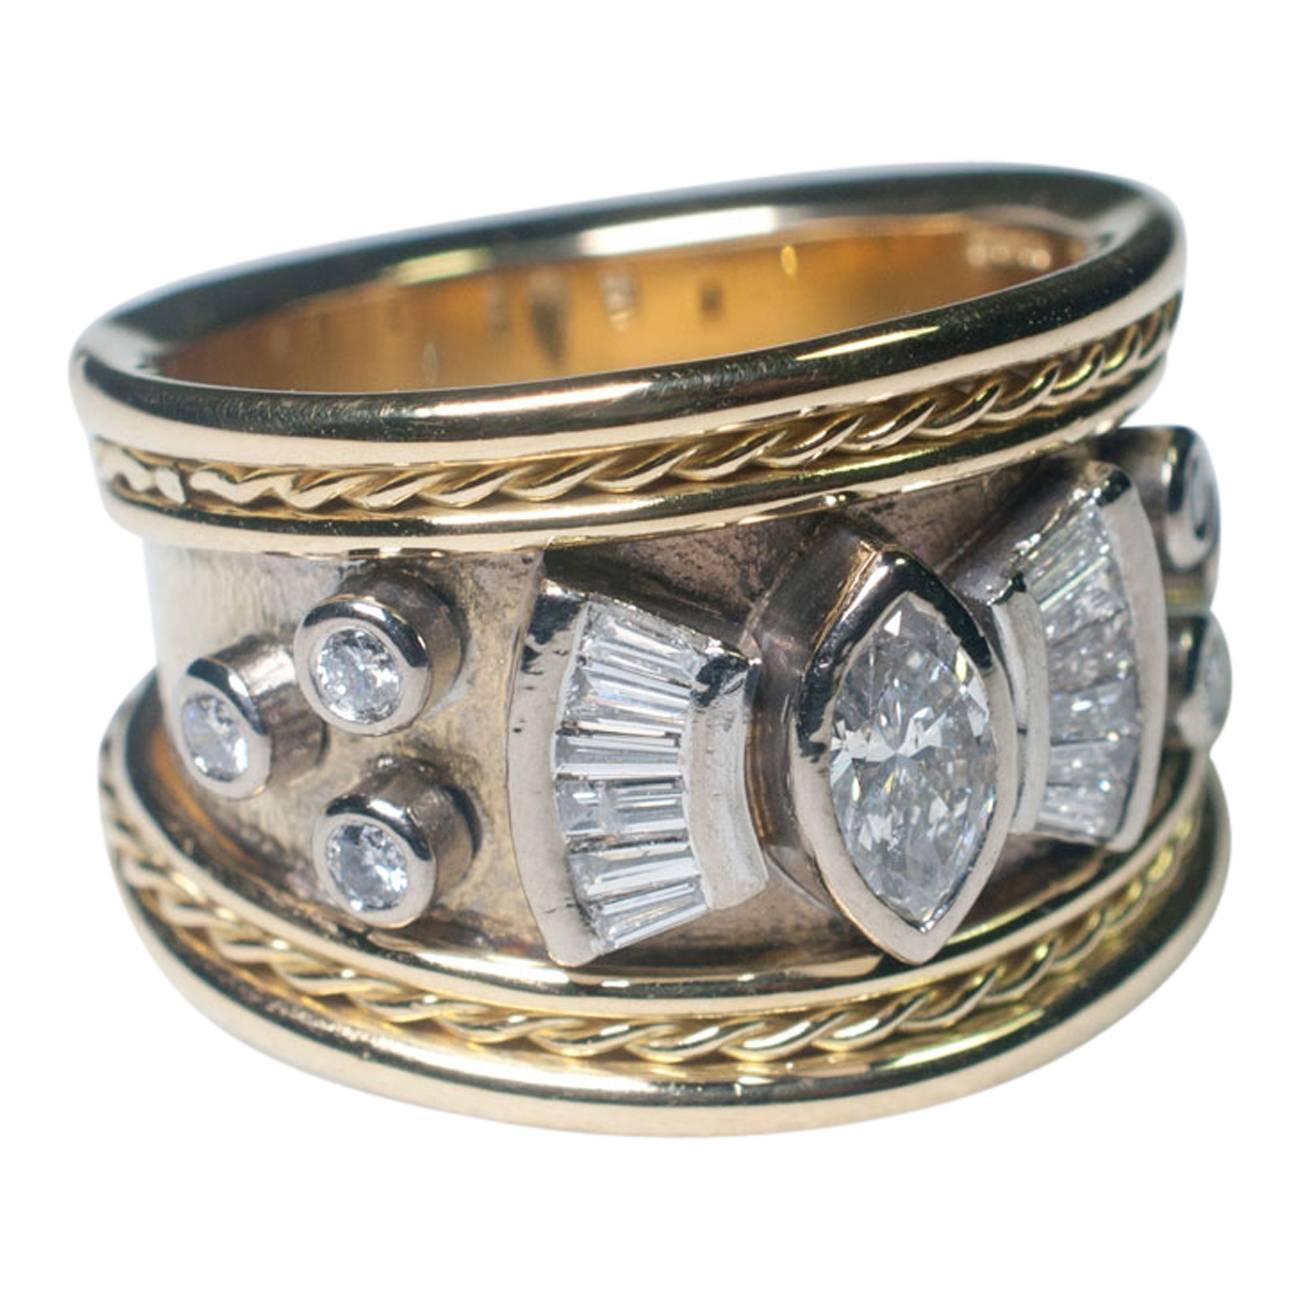 Diamond and gold ring by Stephen Webster in the Etruscan revival style.  It is  set with a central marquise diamond weighing 0.35ct with graduated baguette diamonds fanning out from each side and a further 6 round brilliant cut diamonds, all